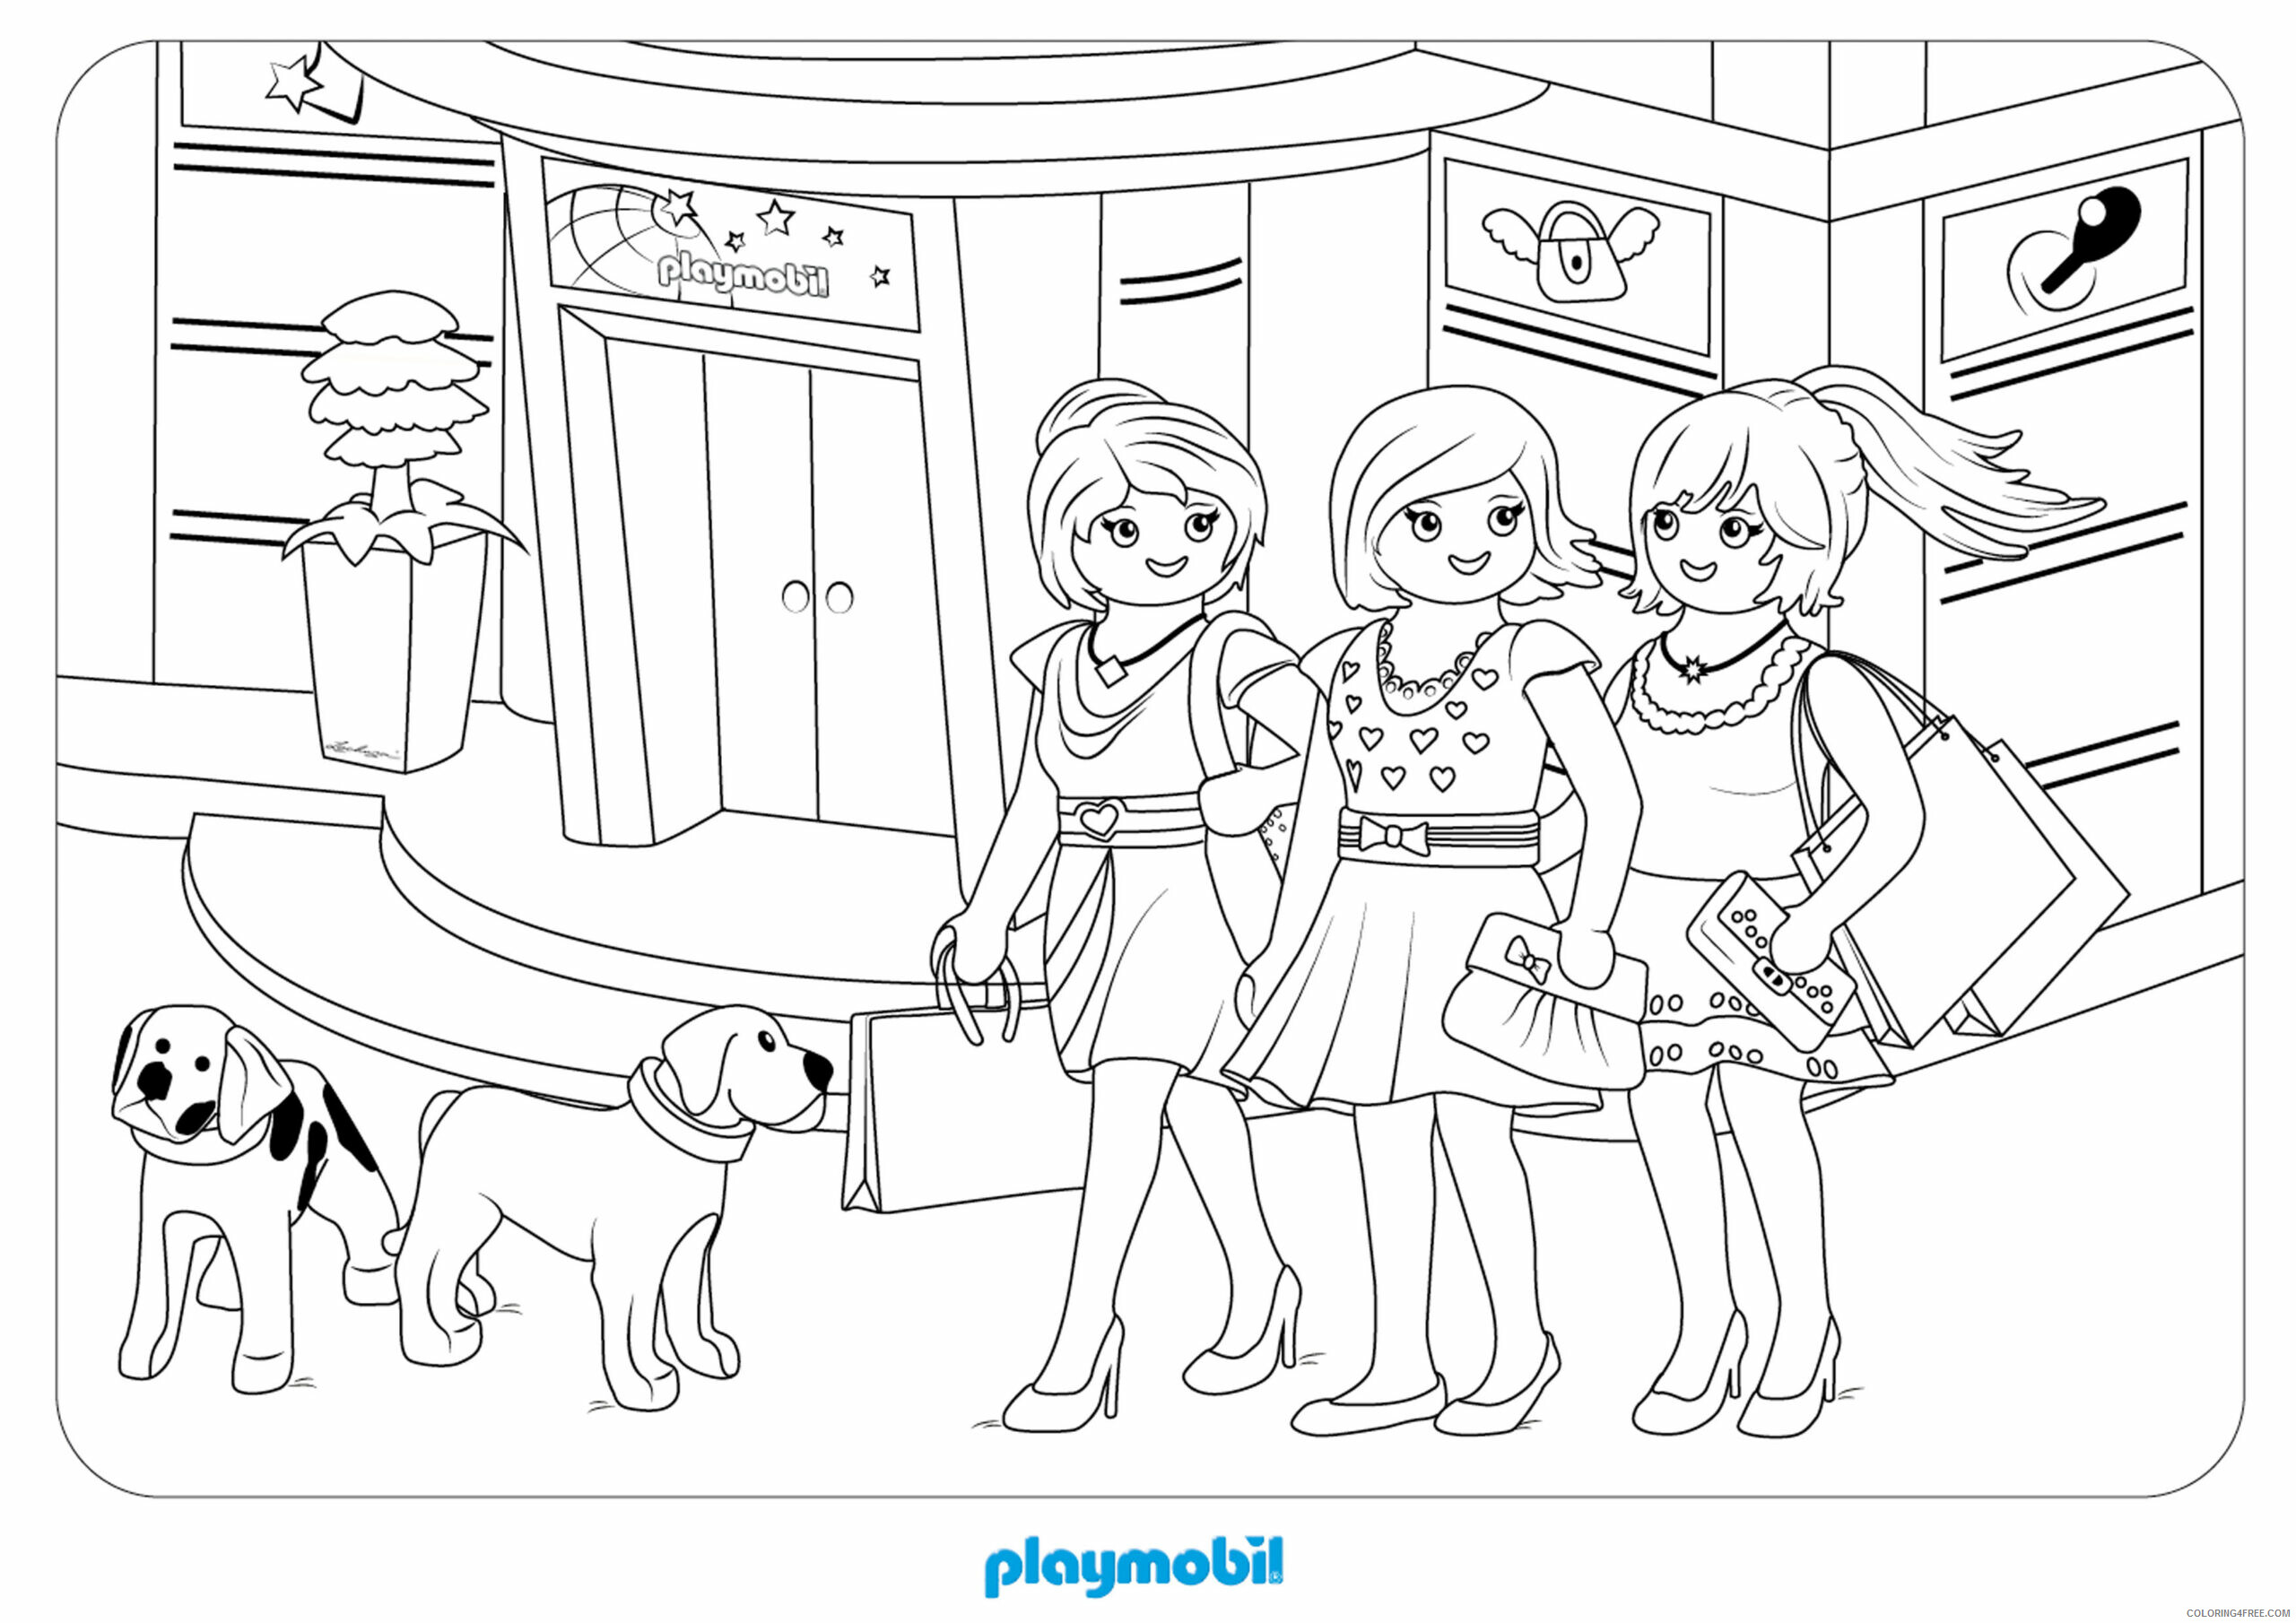 Playmobil Coloring Pages Playmobil Shopping Printable 2021 4652 Coloring4free